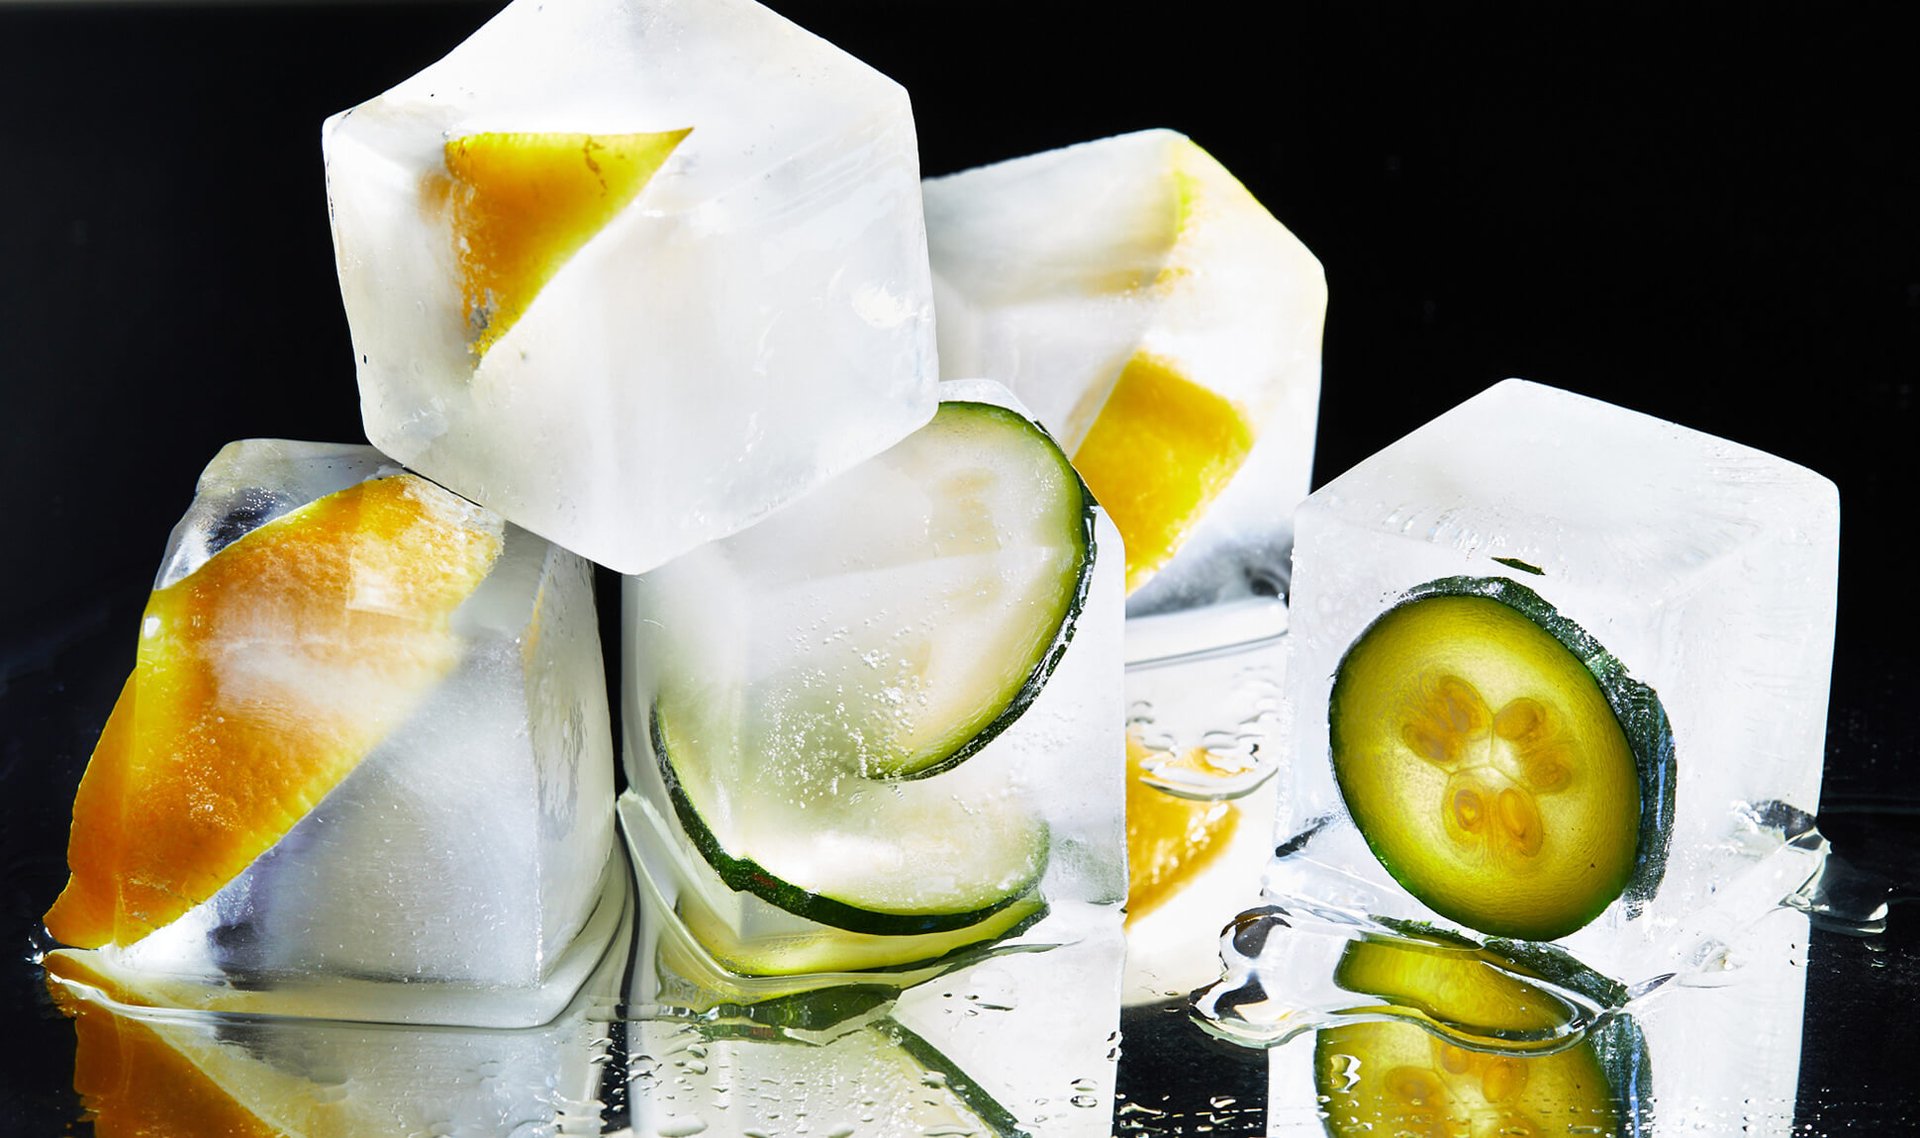 Cool Down This Summer With a Spa-Like, DIY Ice Facial